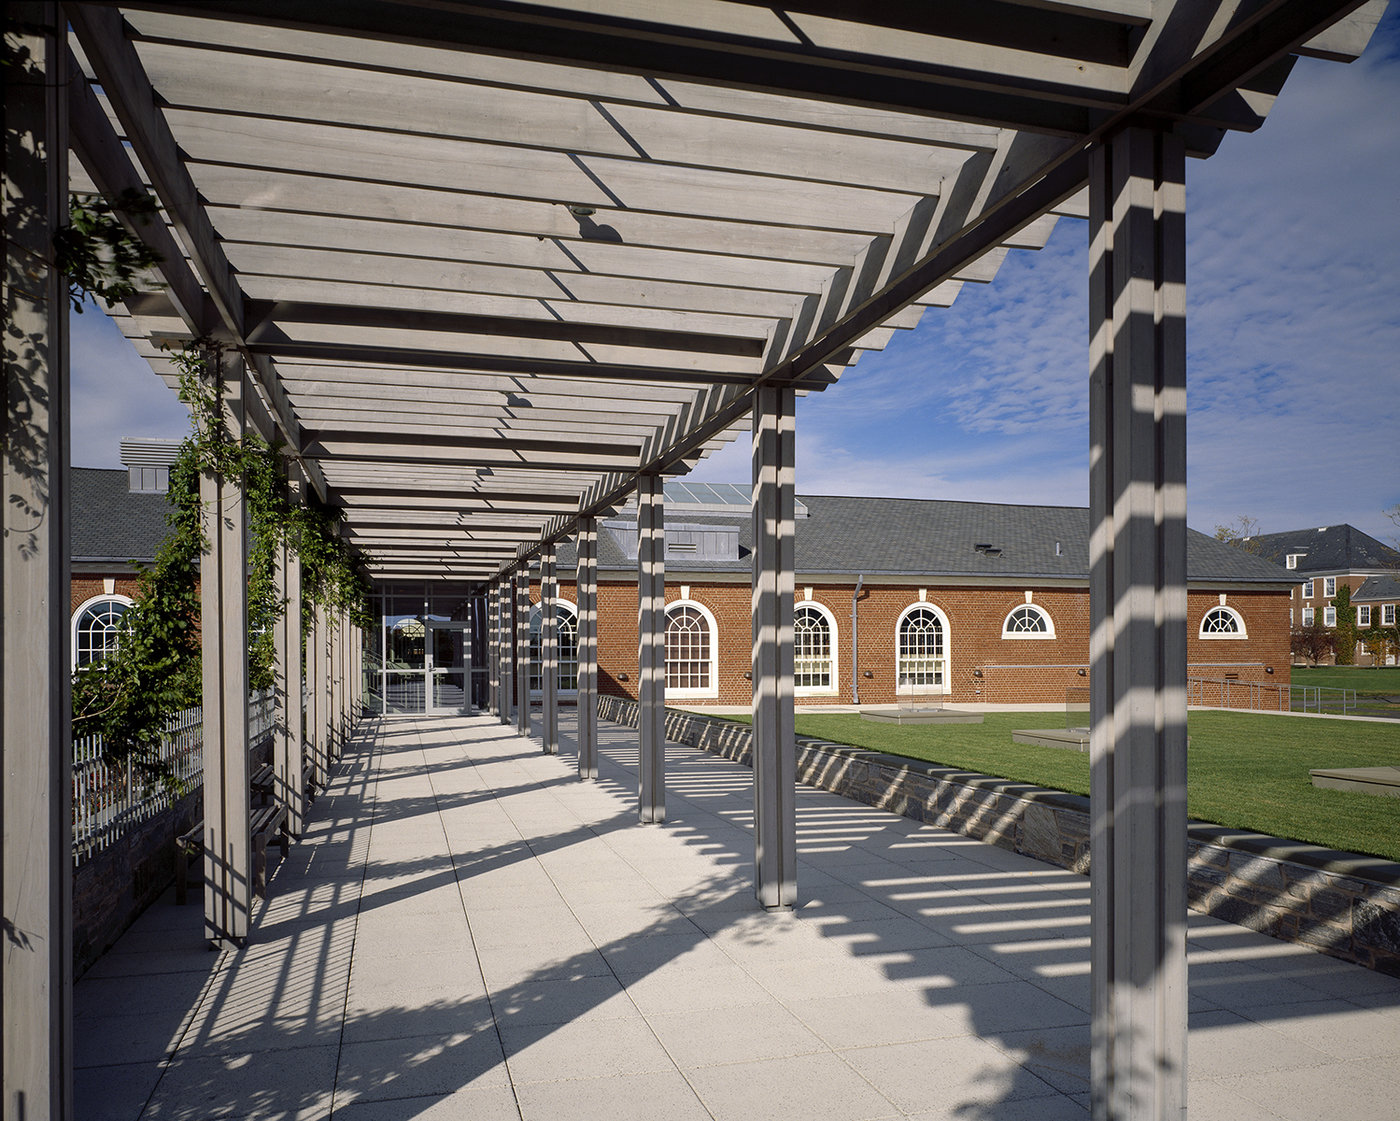 3 tskp pomfret school student union and athletic center exterior detail covered walkway 1400 0x0x1499x1200 q85